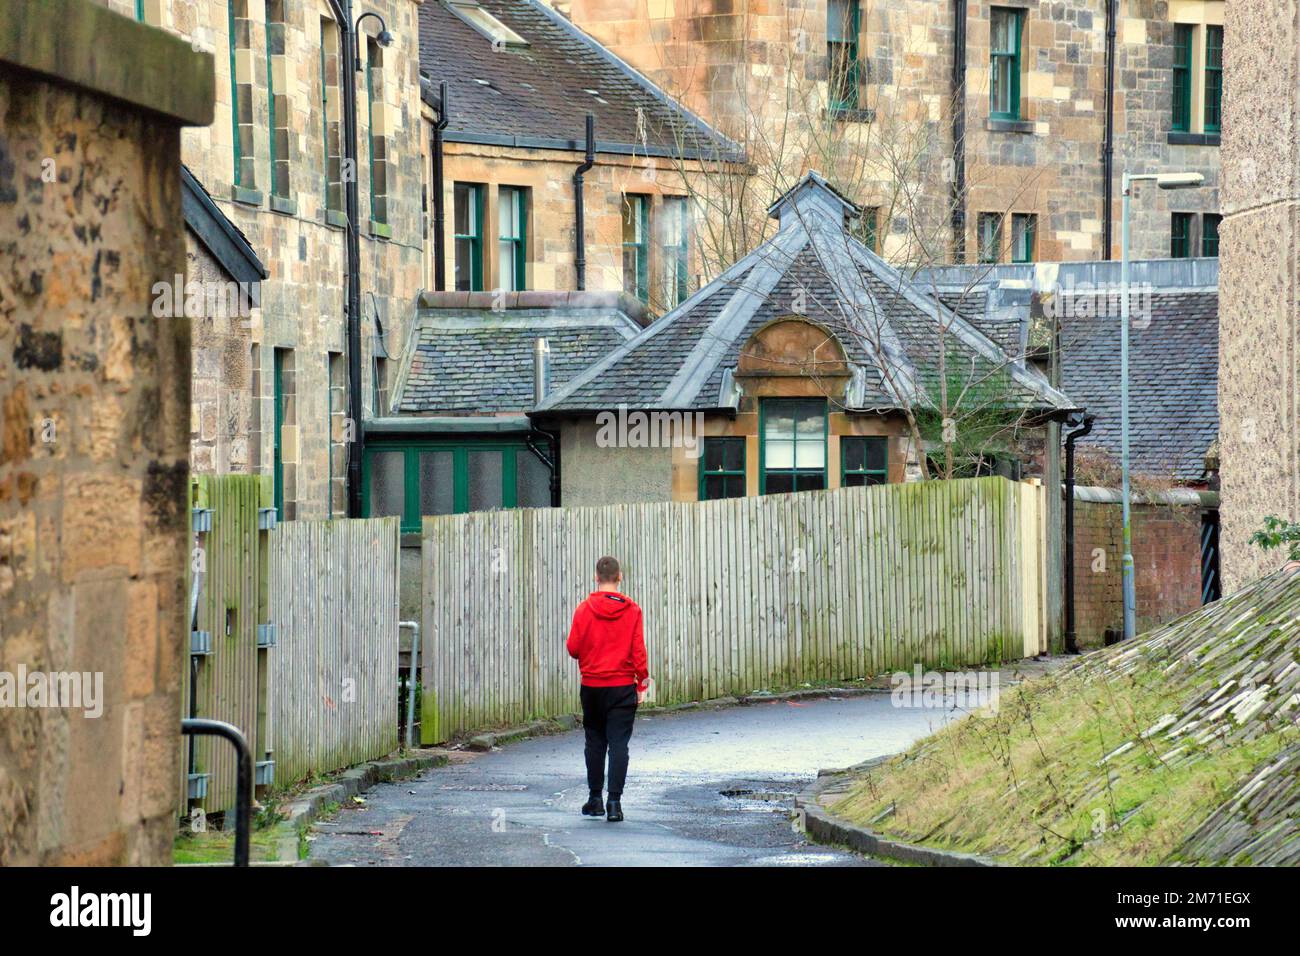 Glasgow university student  on street on the campus in the  affluent west end backcourts lane Stock Photo